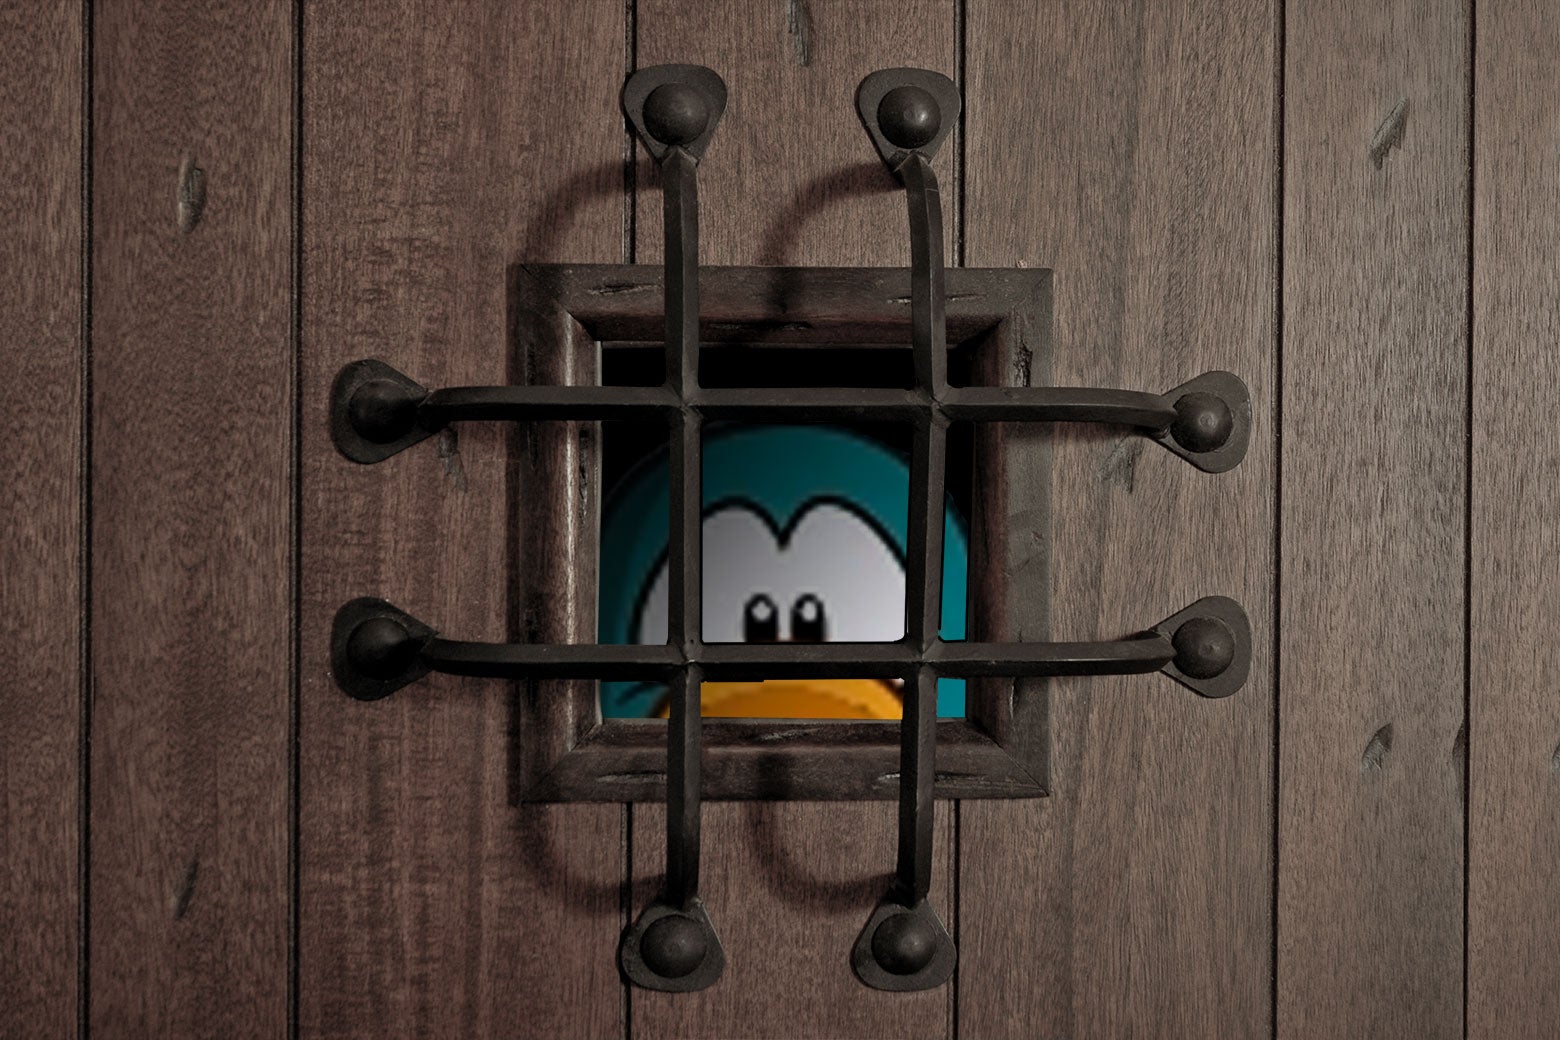 A bright turquoise cartoon penguin peers out from a small, bar-covered hole in a wooden door.